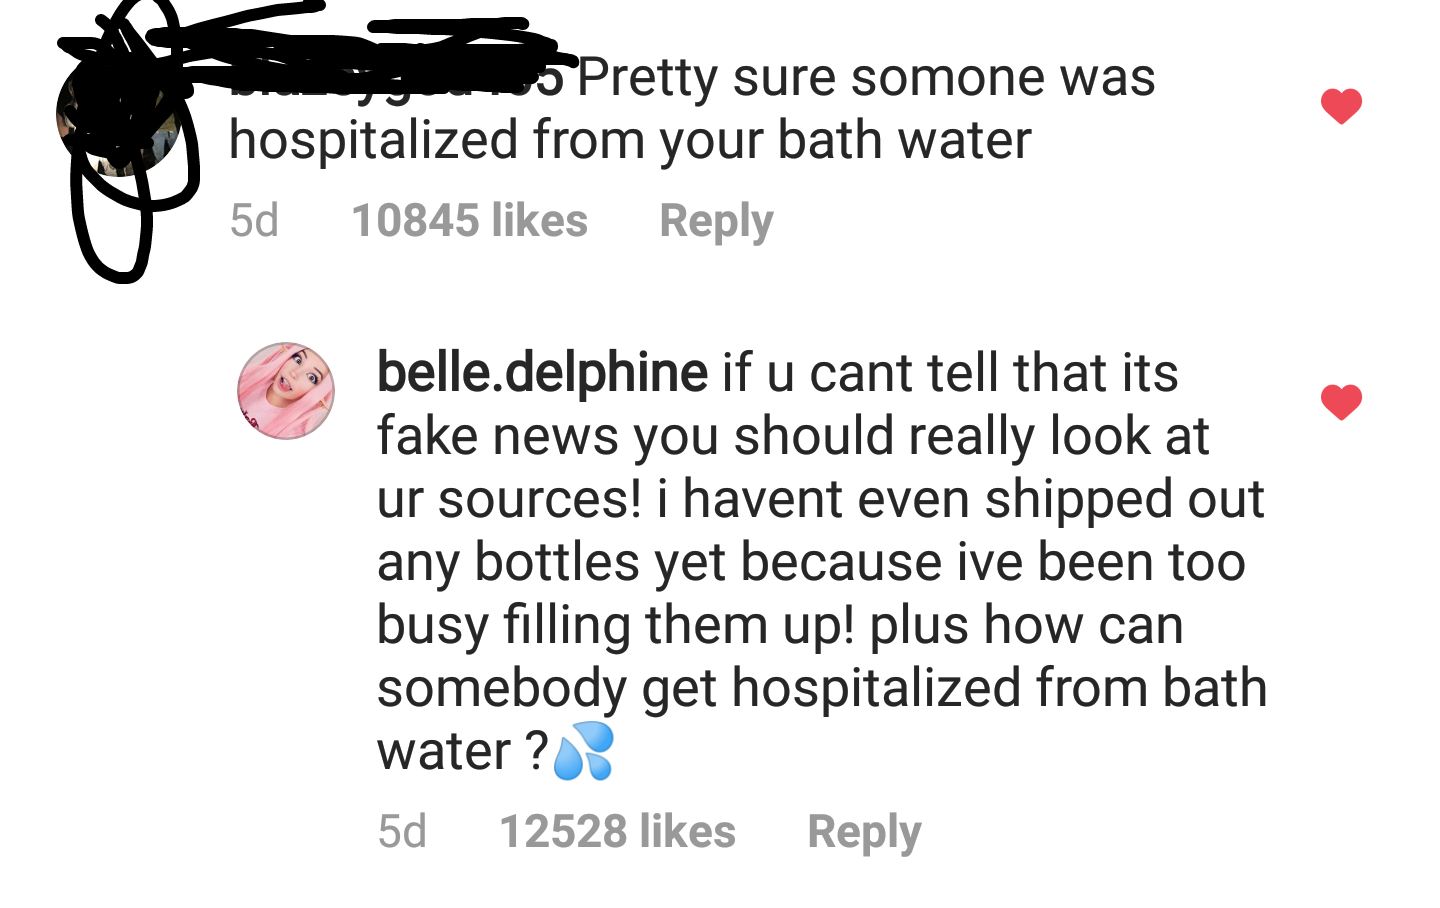 w Pretty sure somone was hospitalized from your bath water 5d 10845 belle.delphine if u cant tell that its fake news you should really look at ur sources! i havent even shipped out any bottles yet because ive been too busy filling them up! plus ho